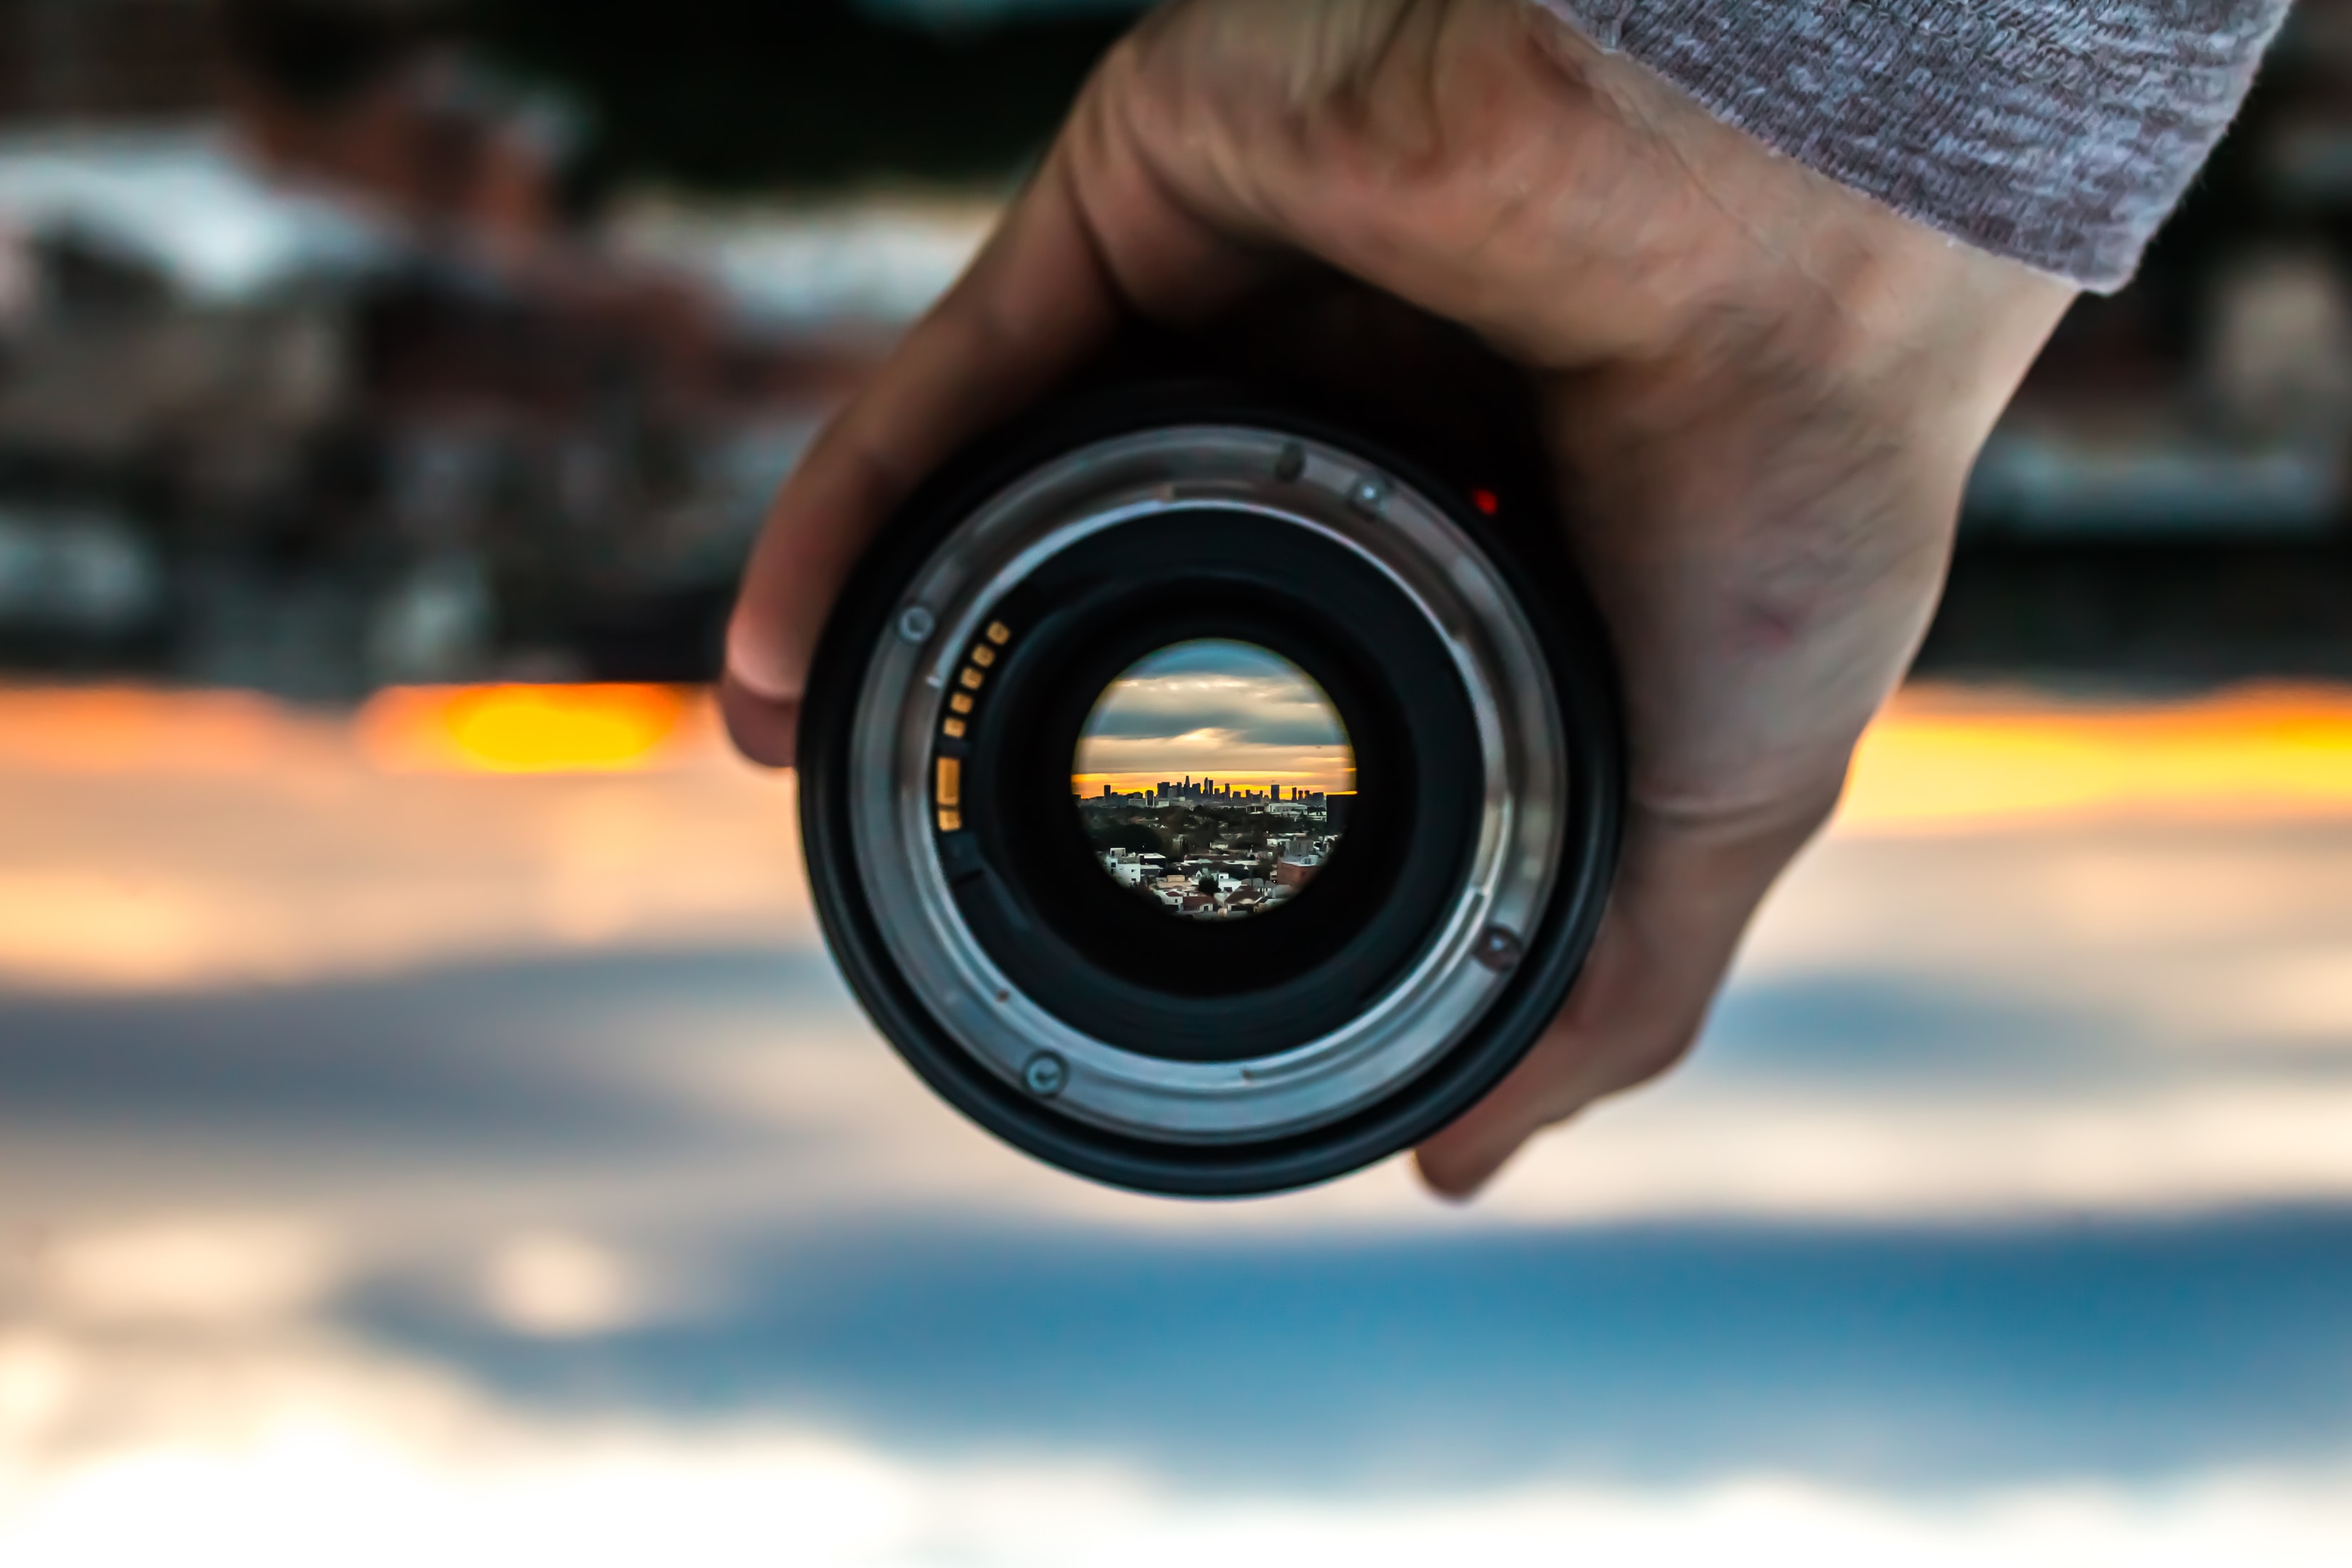 Focus image from unsplash. Photo by Devin Avery on Unsplash